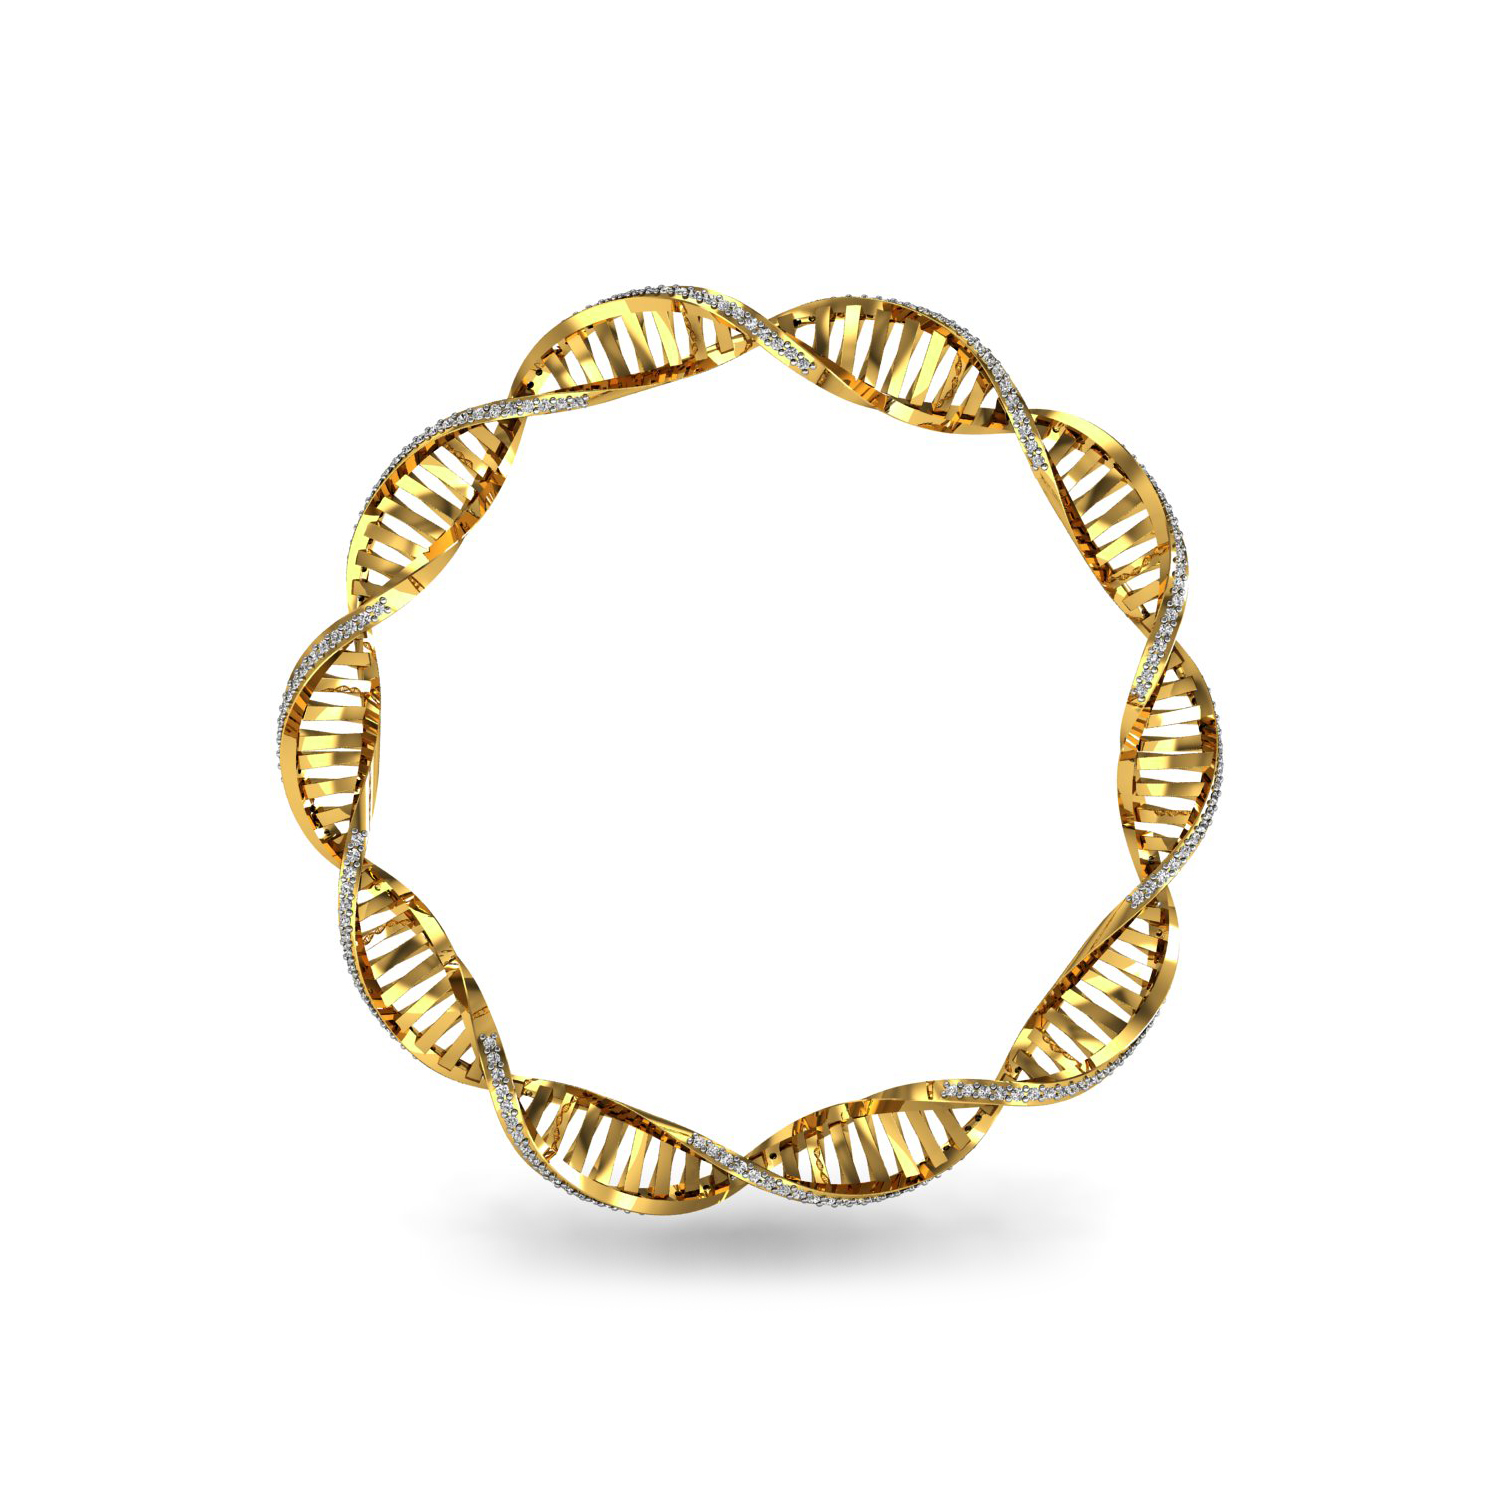 Natural diamond solid gold spiral style bangle